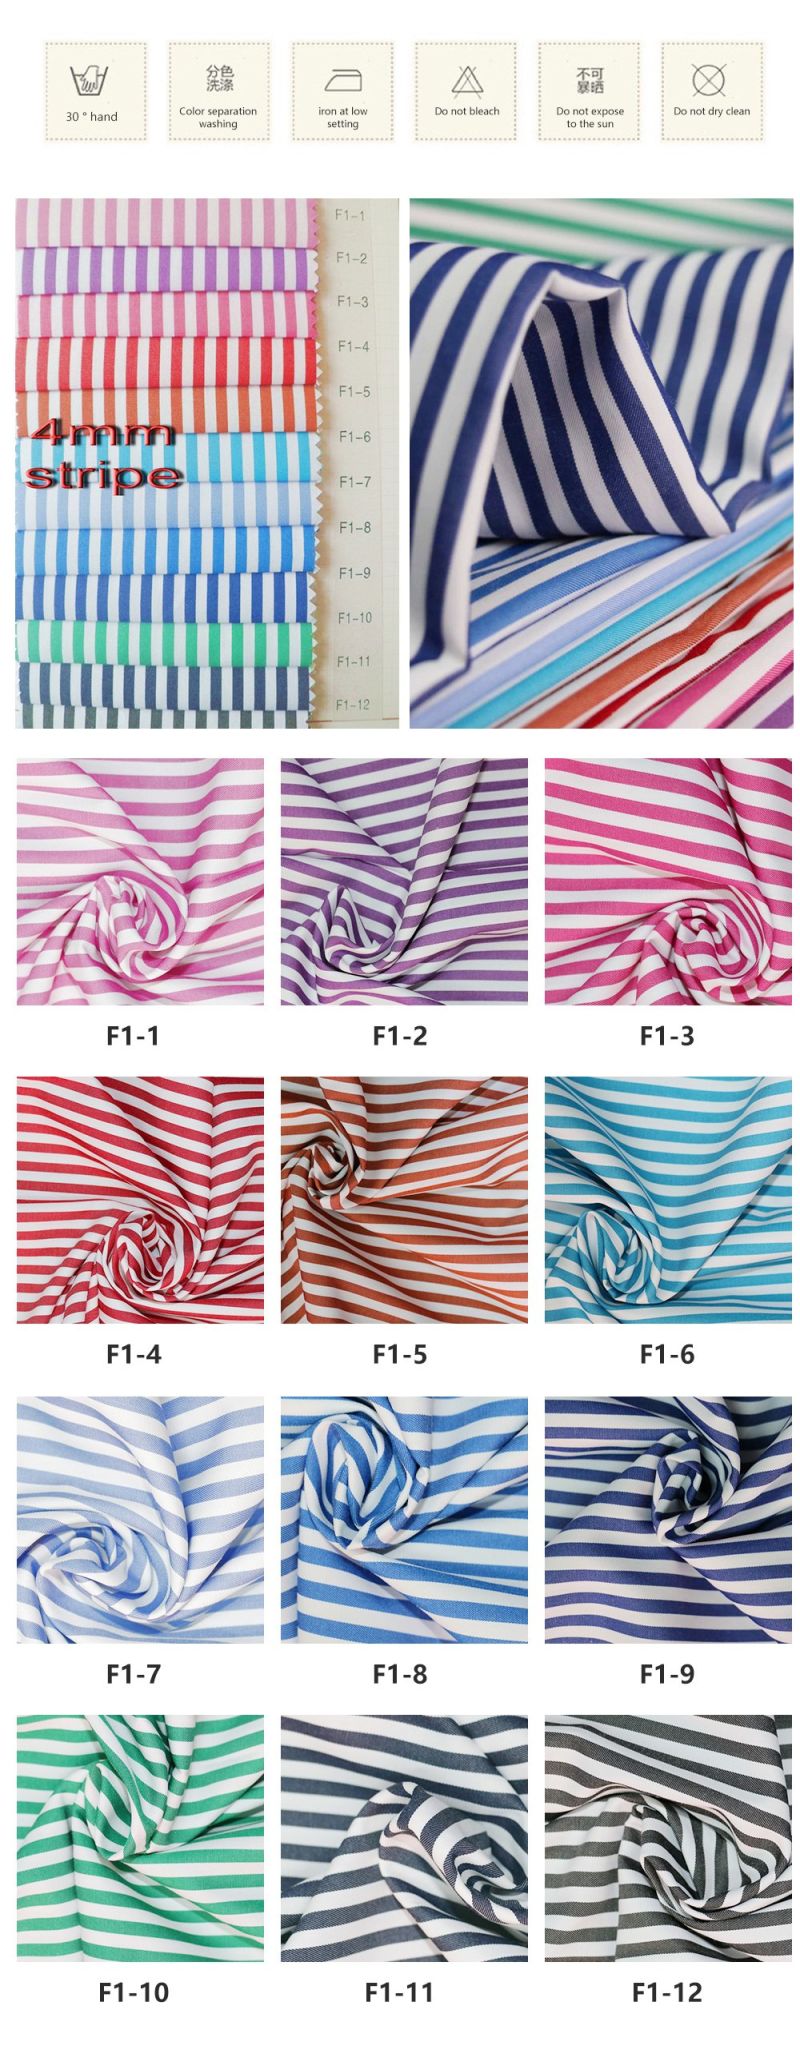 Polyester Herringbone UV Cut Woven Fabric for Casual Shirts